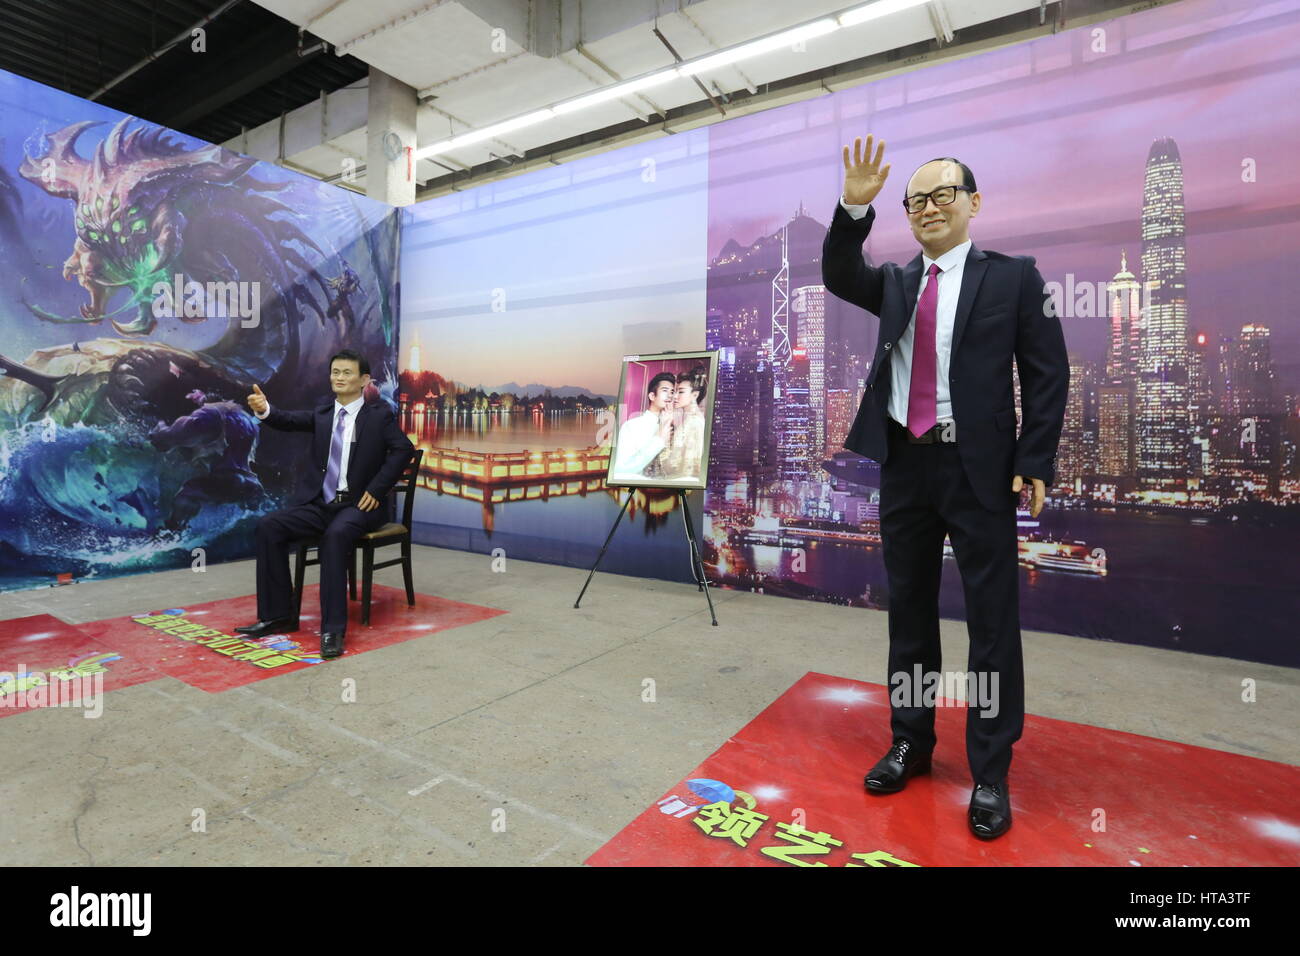 Shenyan, China. 9th Mar, 2017. A wax figure of Li Ka-shing at an expo in Shenyang, northeast China. Wax figures of Chinese and international celebrities can be seen at an expo in Shenyang, northeast China's Liaoning Provice, March 9th, 2017. Credit: SIPA Asia/ZUMA Wire/Alamy Live News Stock Photo